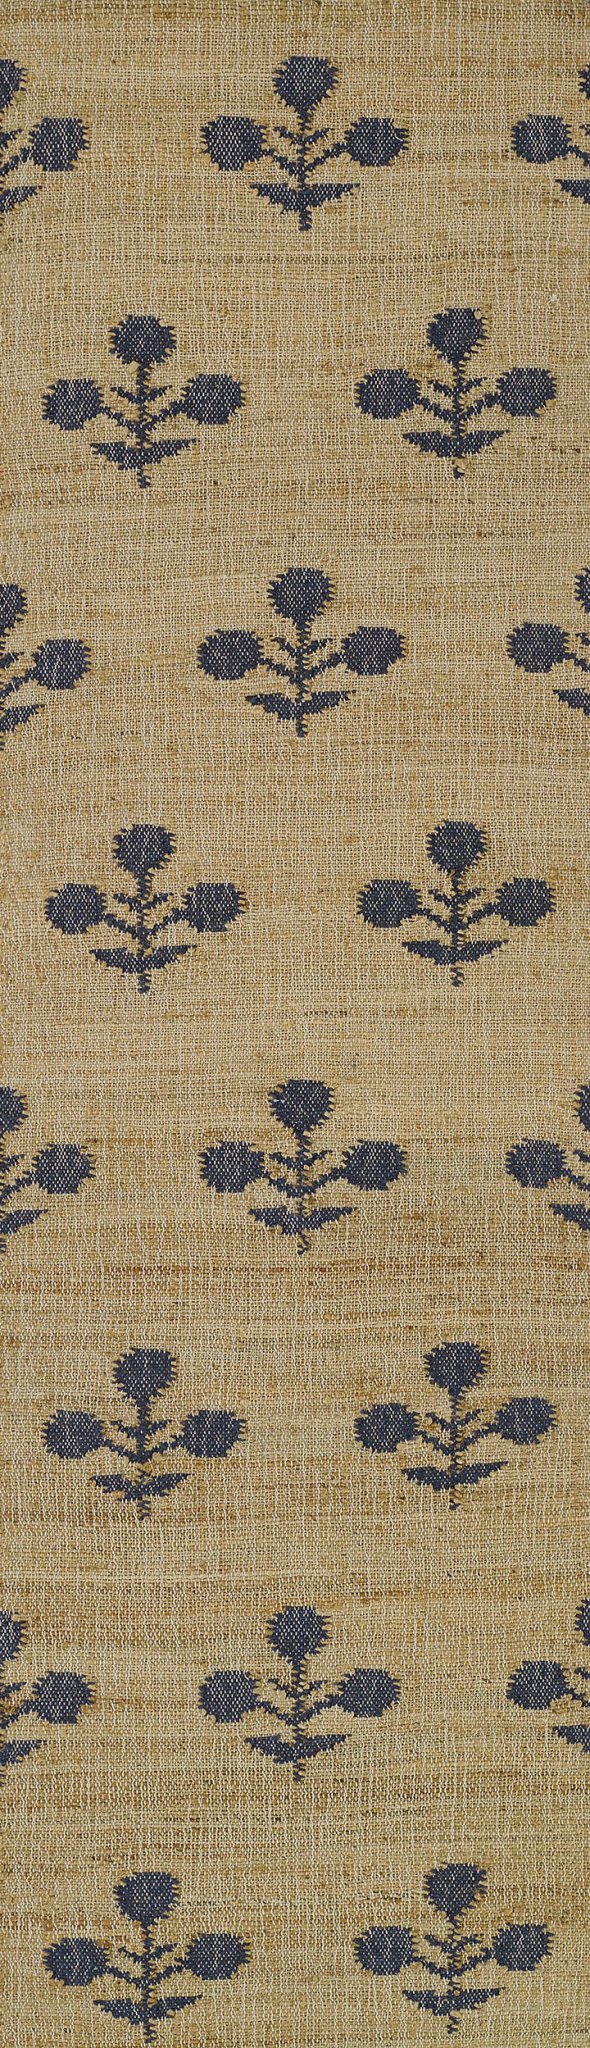 Erin Gates by Momeni Orchard Bloom Blue Hand Woven Wool and Jute Area Rug - BlueJay Avenue